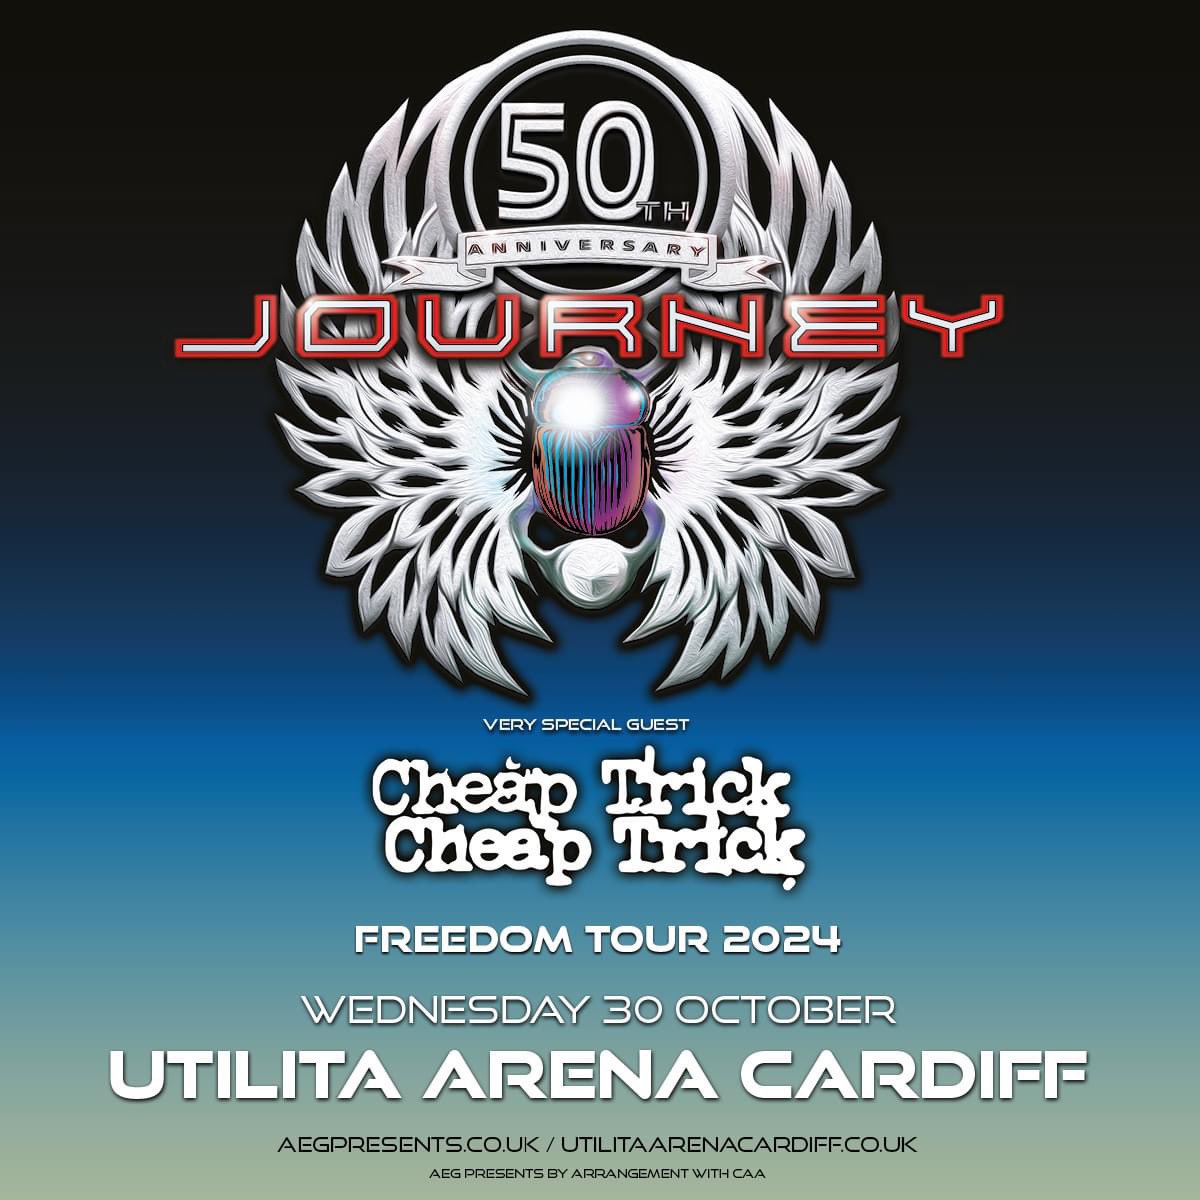 🤩 NEW SHOWS 🤩 JOURNEY - Freedom Tour 2024 with special guests Cheap Trick 📆 30 October 2024 👉 Tickets on general sale Friday 1 March, 10am 🎟️ Tickets via bit.ly/JourCdf24 or call 029 2022 4488